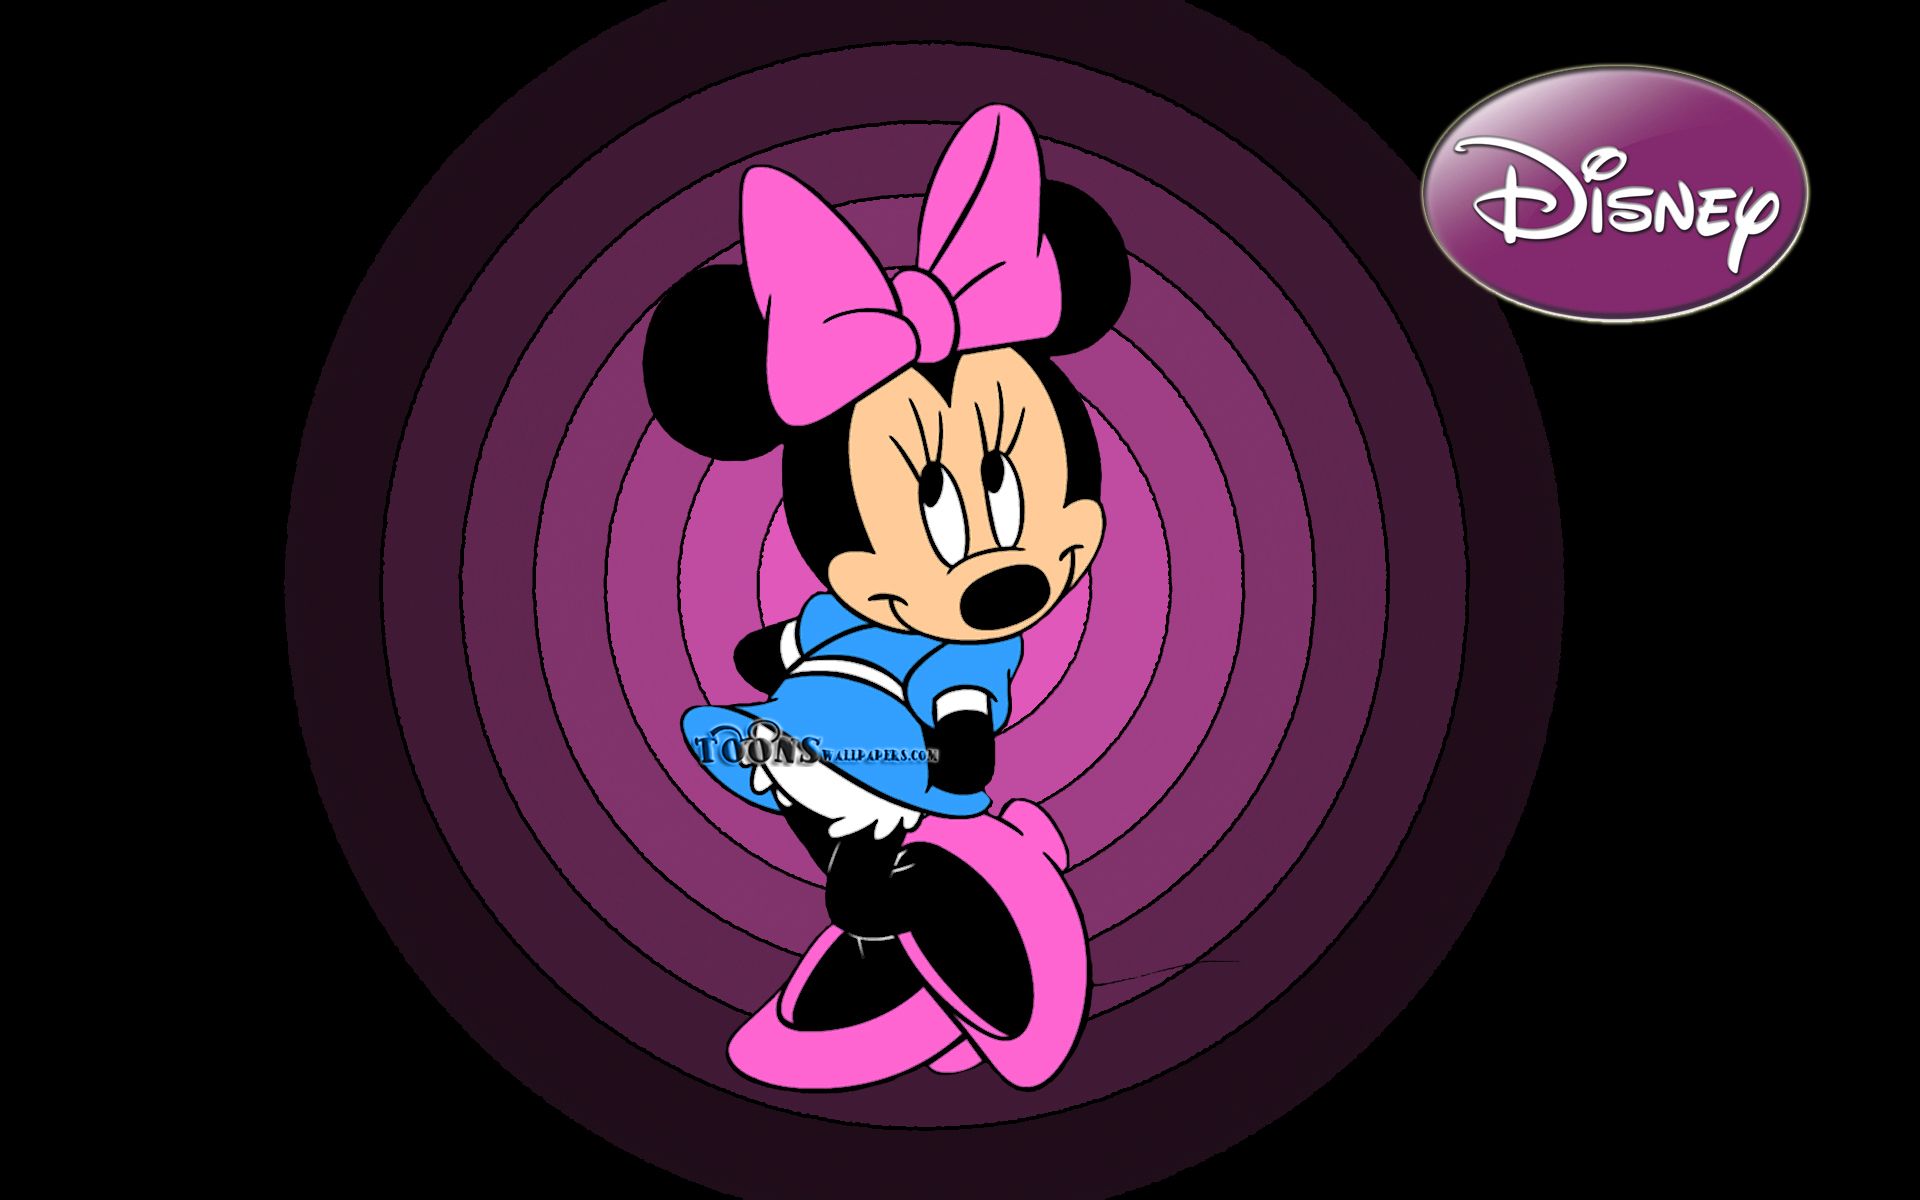 Minnie mouse in a purple circle - Minnie Mouse